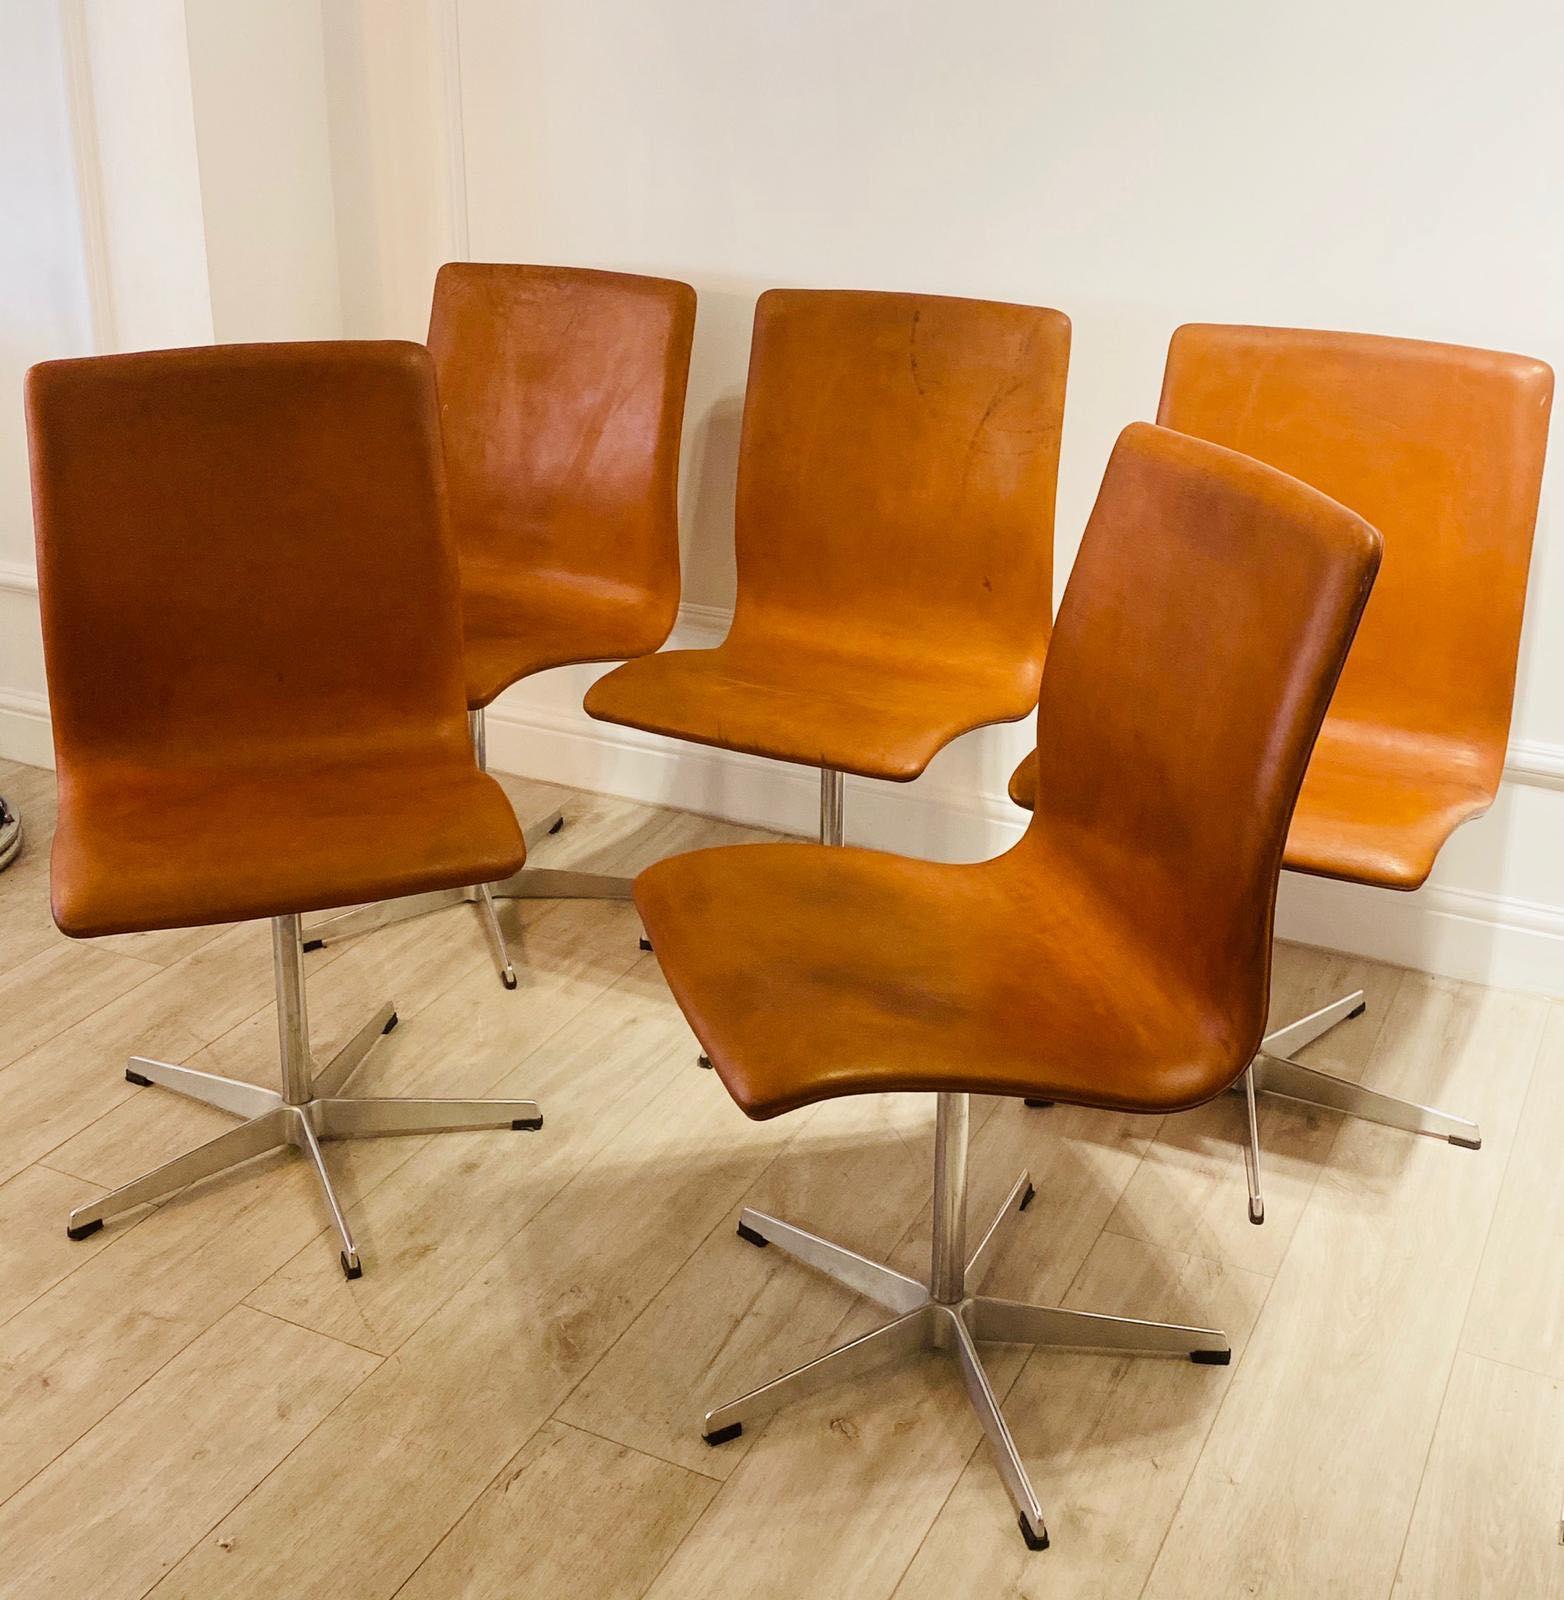 Beautiful and rare set of six Arne Jacobsen Oxford swivel chairs. Made by Fritz Hansen Denmark, 1960s

Original tan leather with aluminium base and original labels.

Very good original unrestored condition, authentic aged patina on the leather.